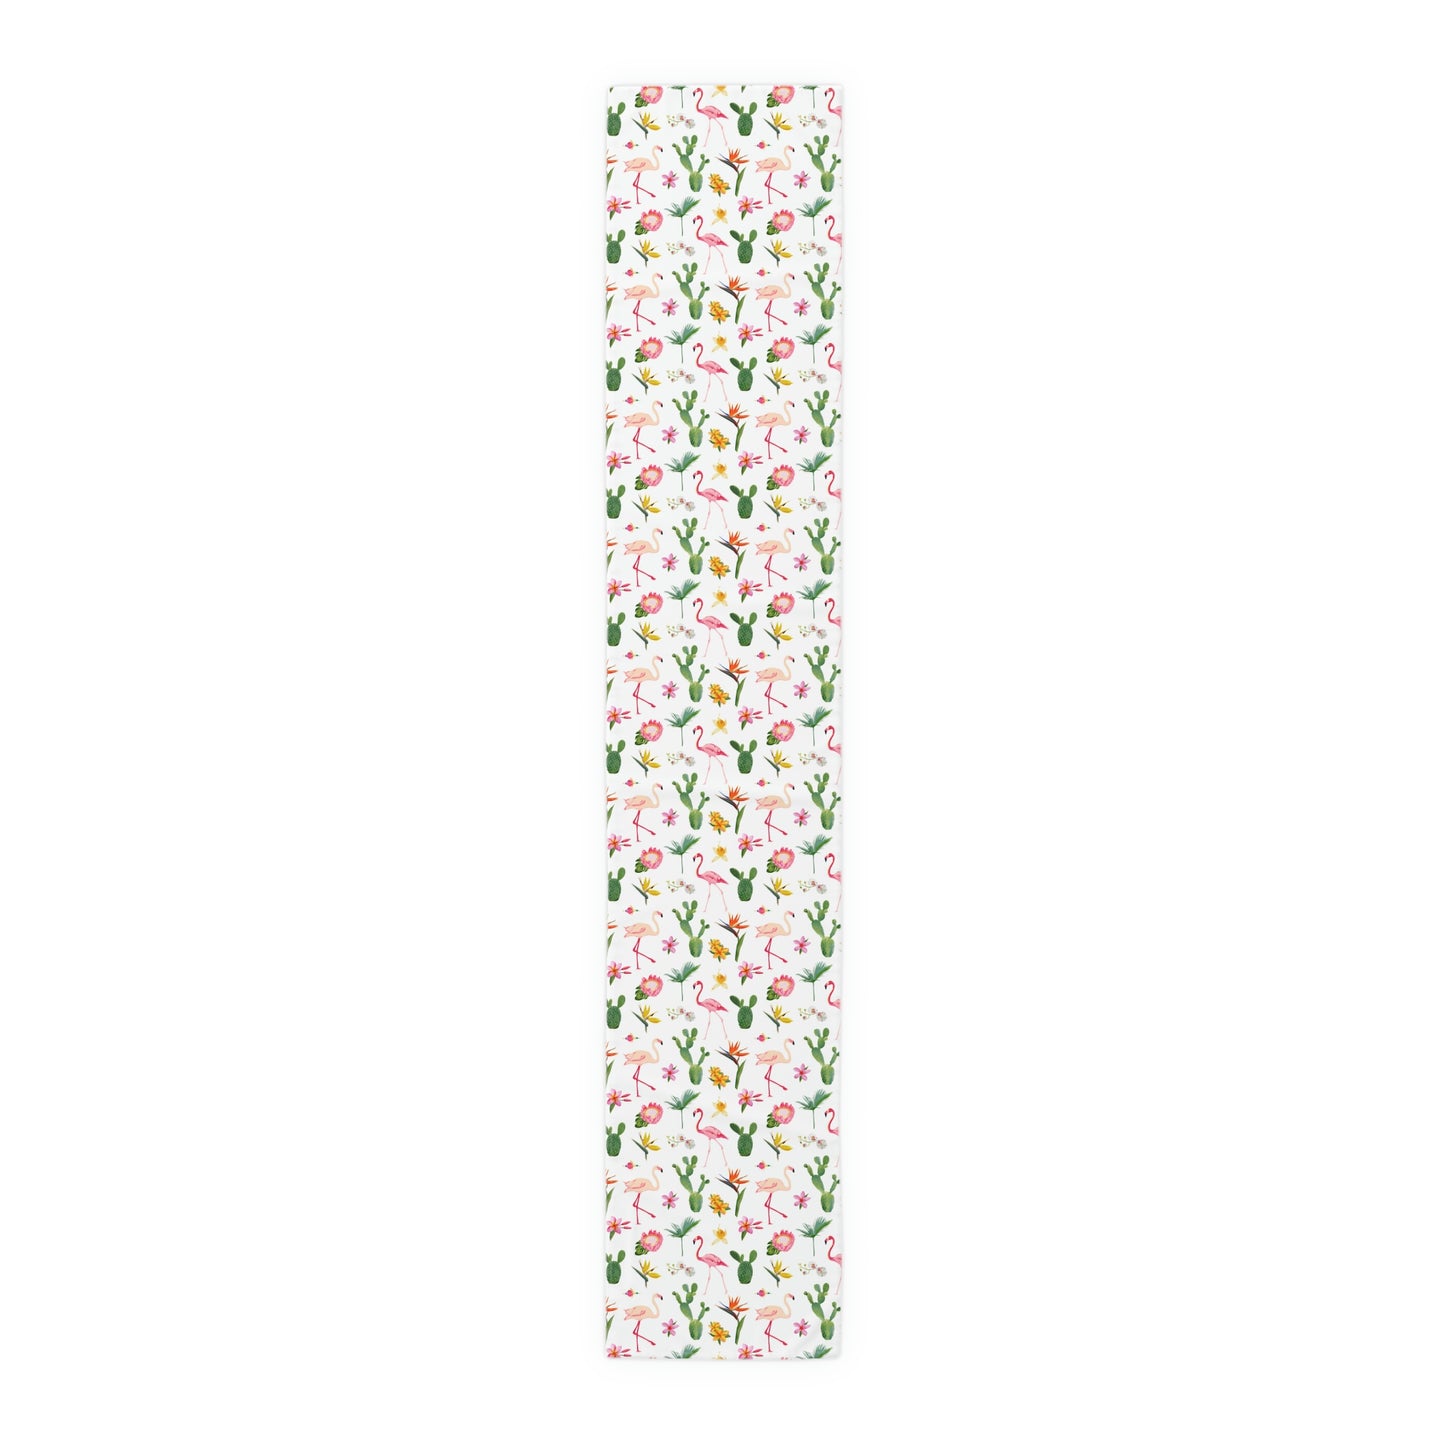 Cactus and Flamingos Table Runner (Cotton, Poly)